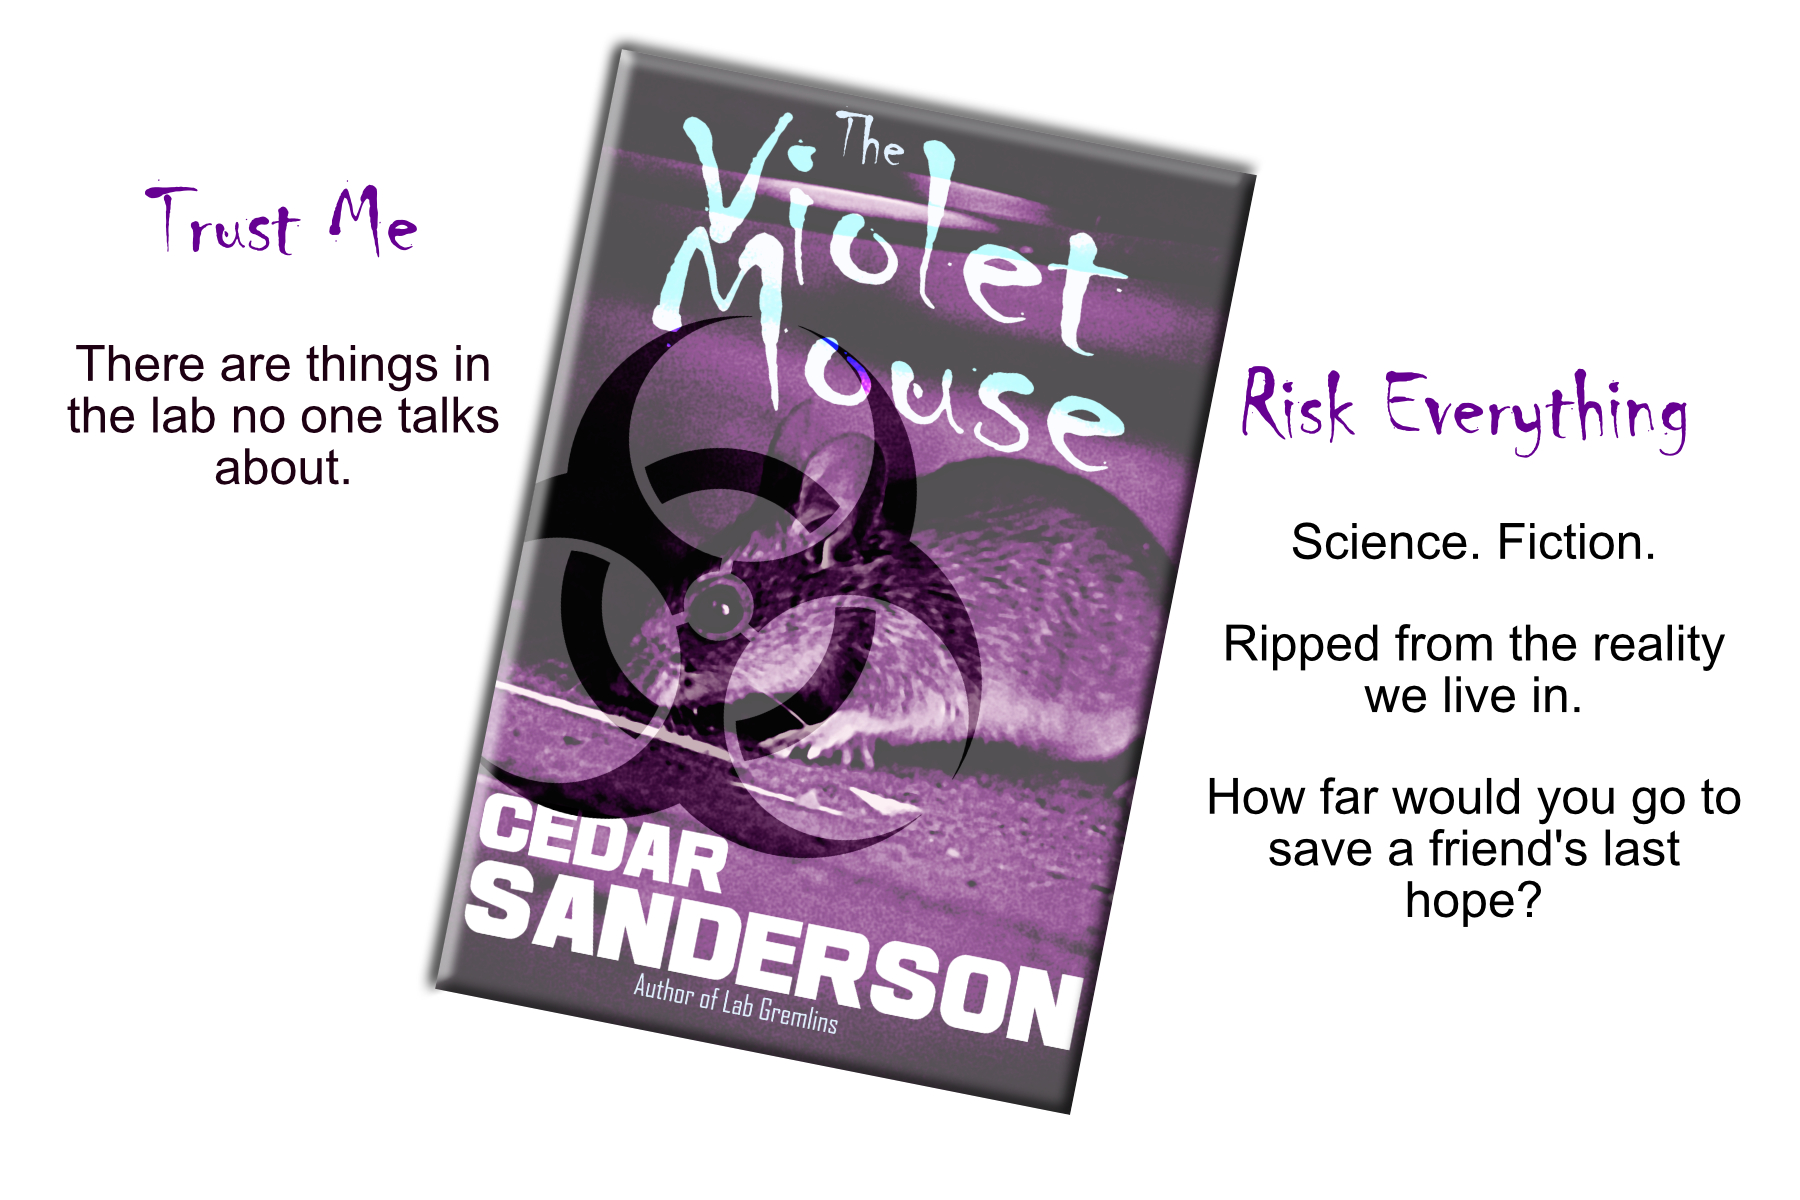 New Release: The Violet Mouse